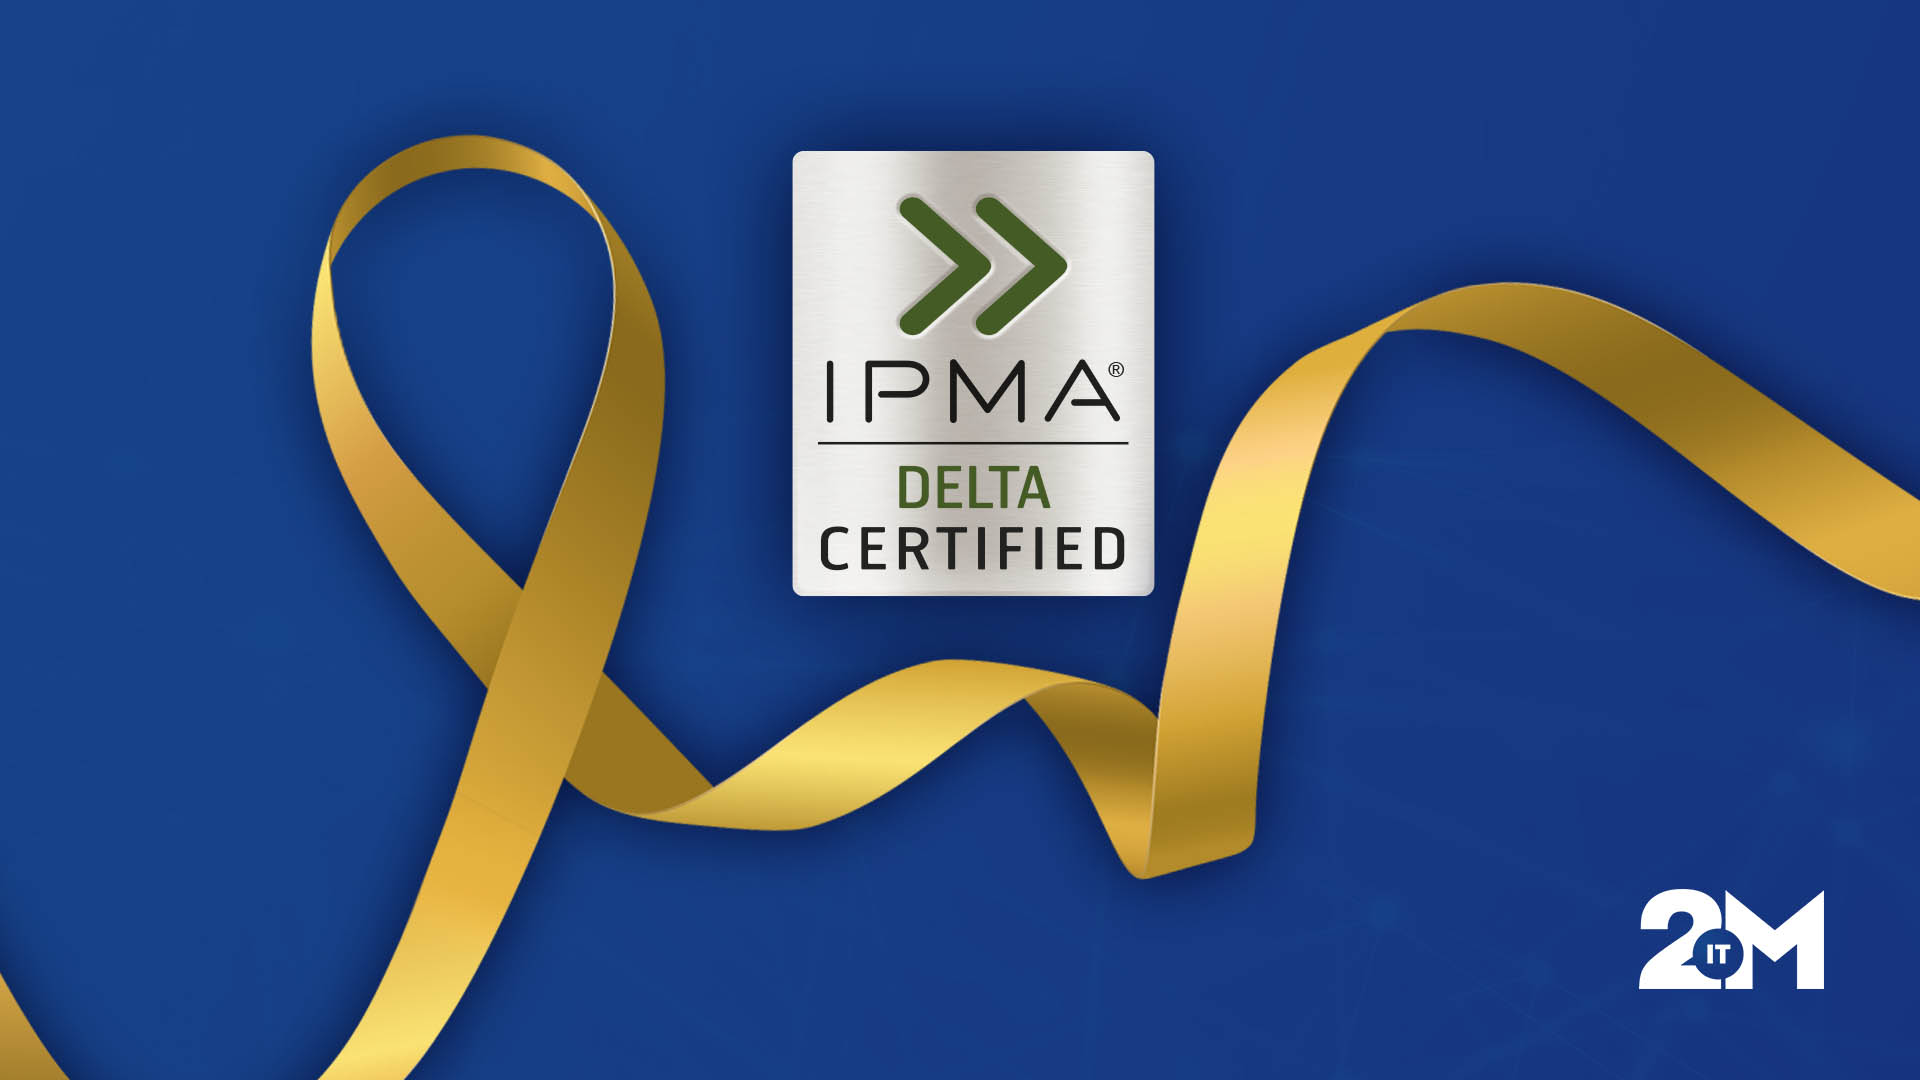 2M-IT is the first company in Finland to achieve class 3 IPMA Delta certification